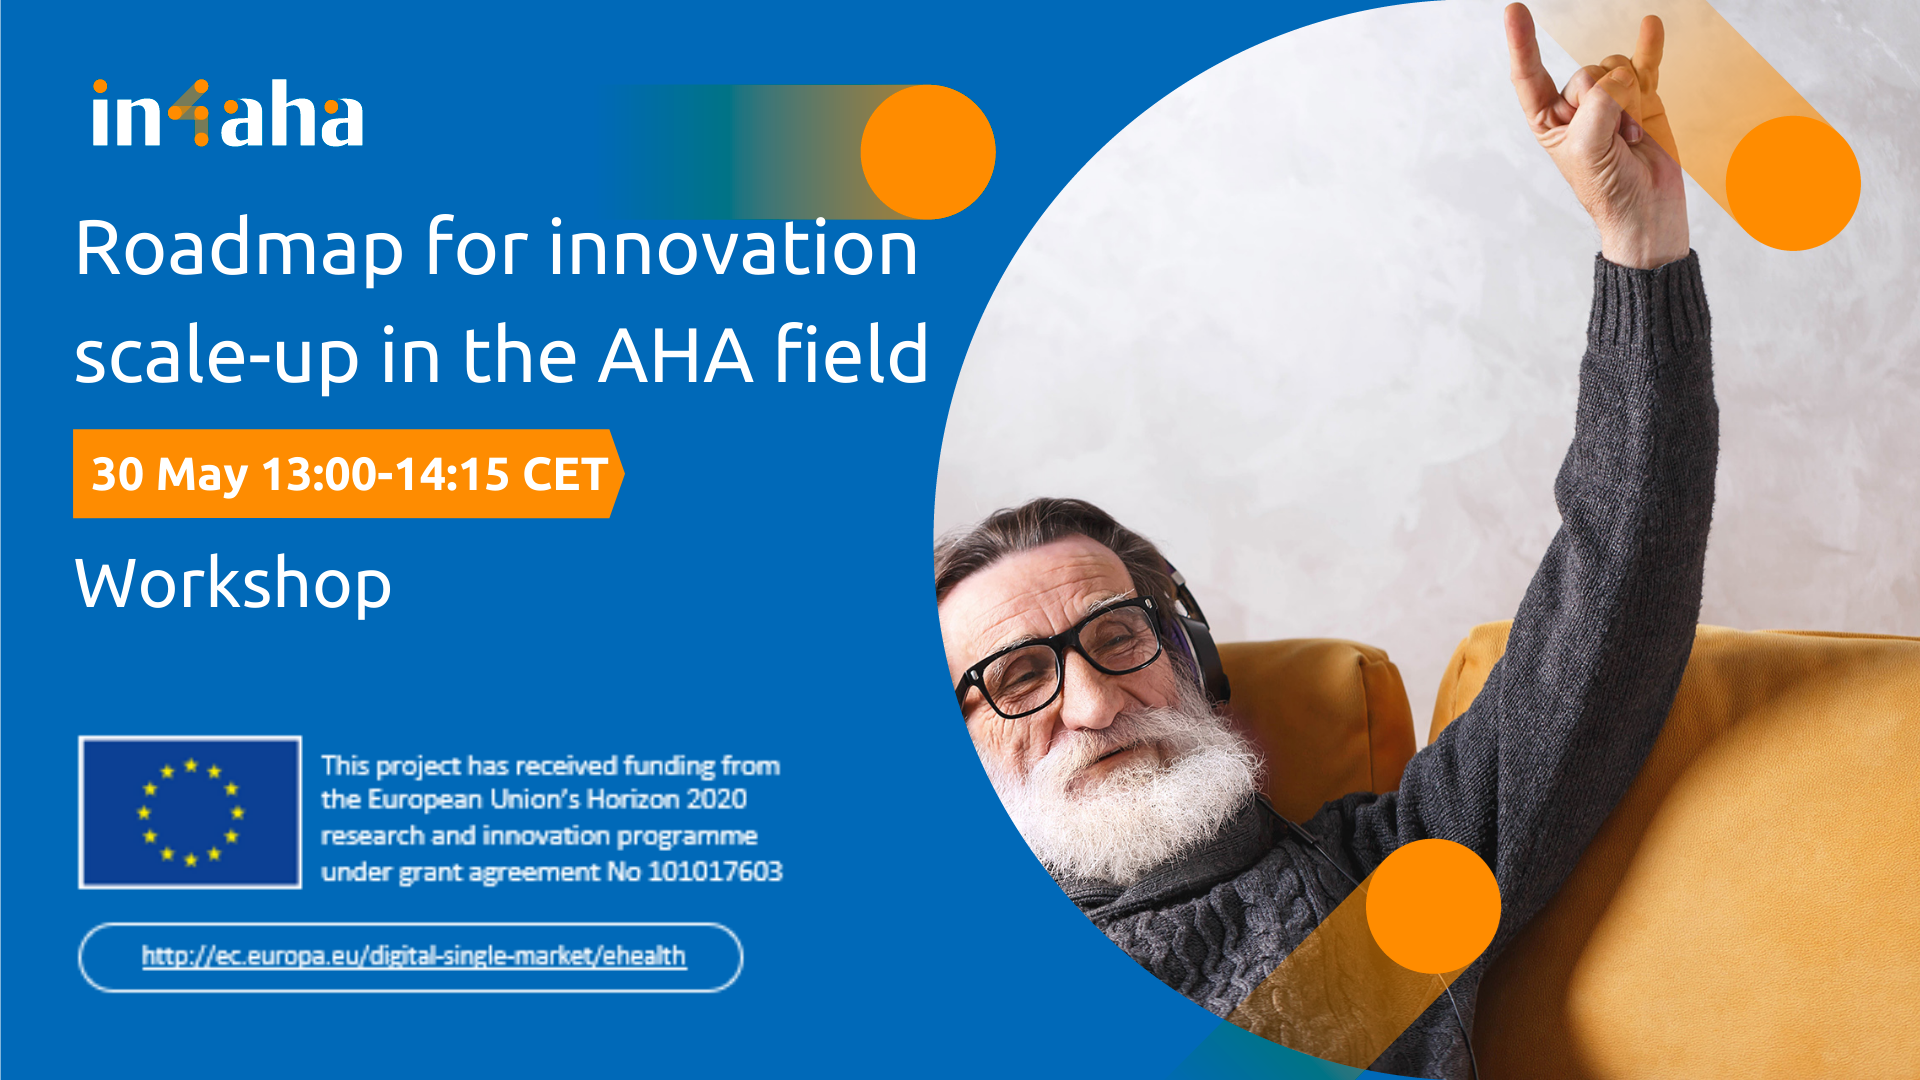 IN-4-AHA "Workshop: roadmap for innovation scale-up in the AHA field"